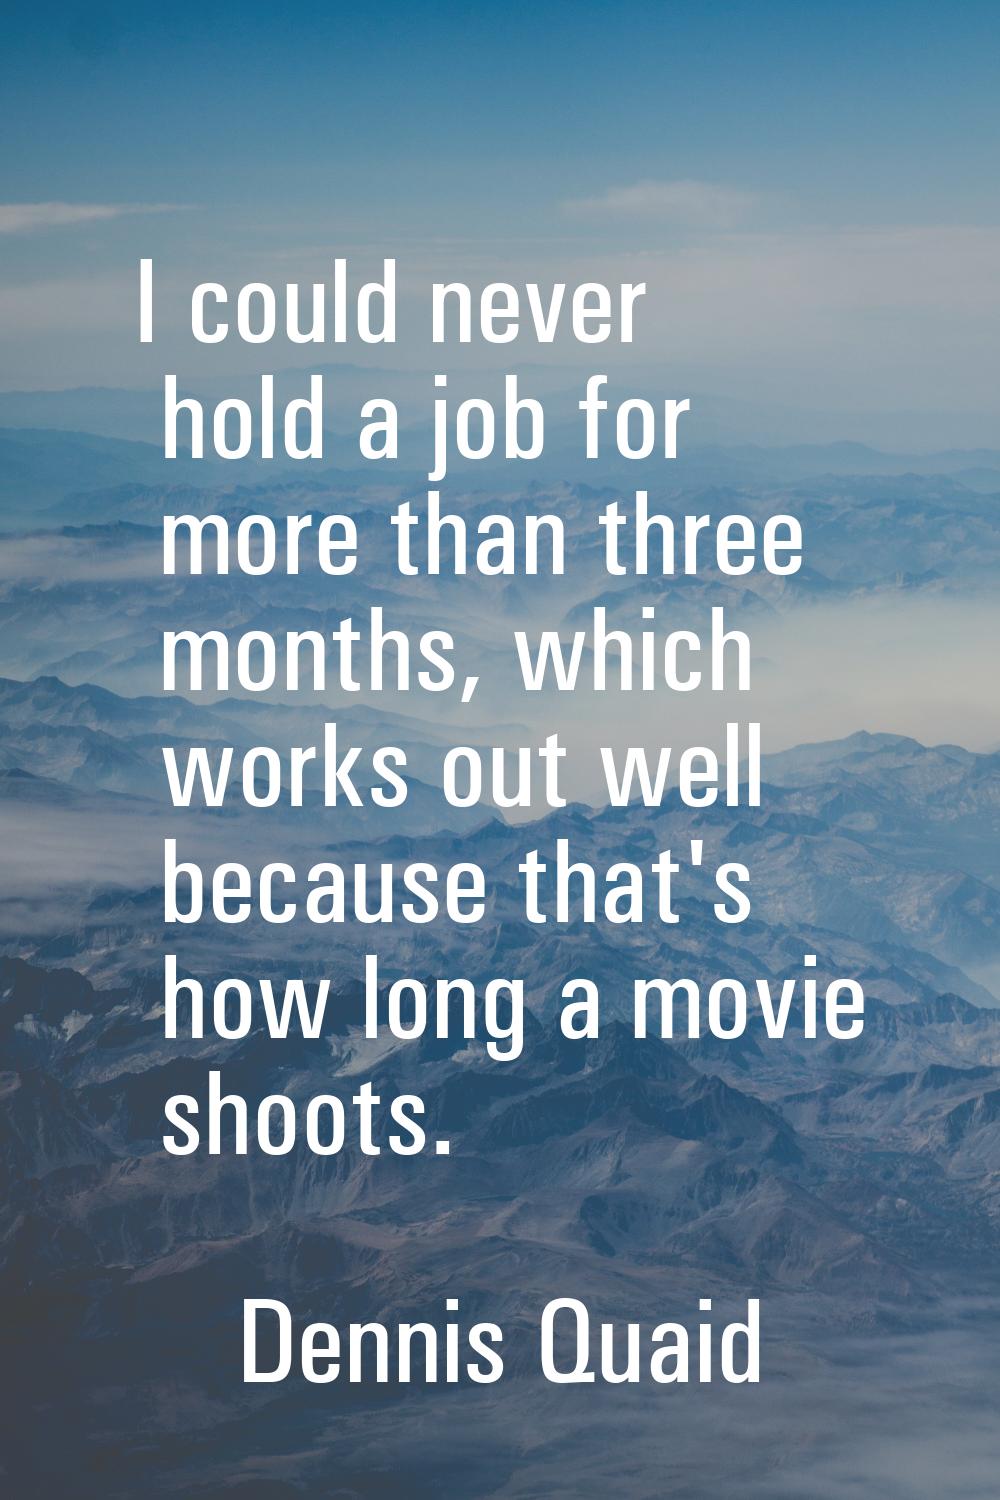 I could never hold a job for more than three months, which works out well because that's how long a